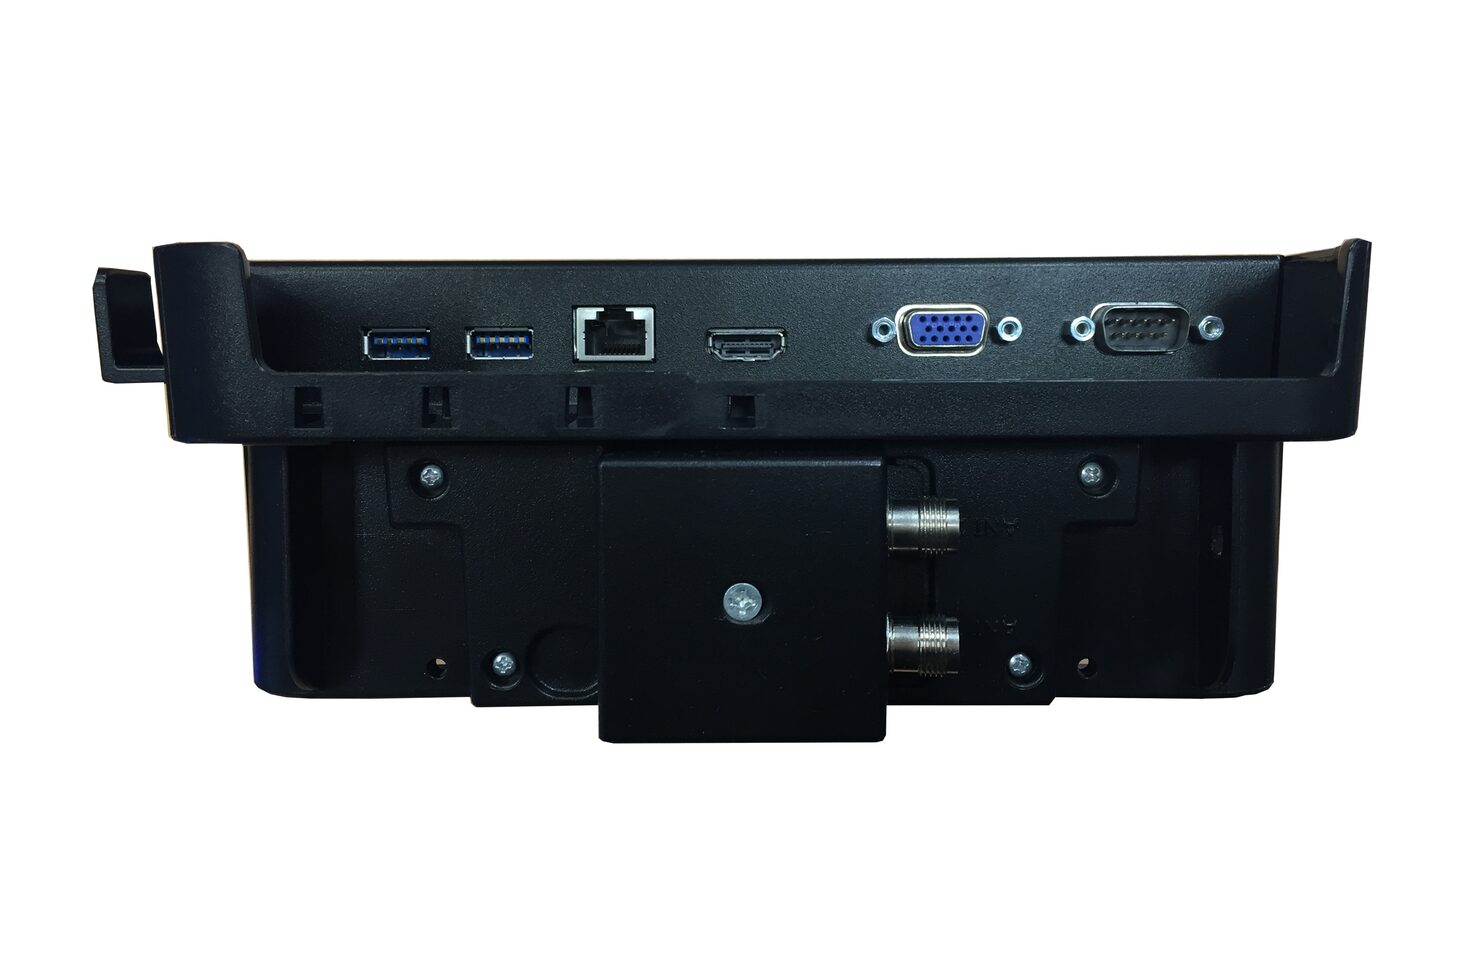 Standard Vehicle Dock for TOUGHBOOK M1 (Gamber Johnson) images